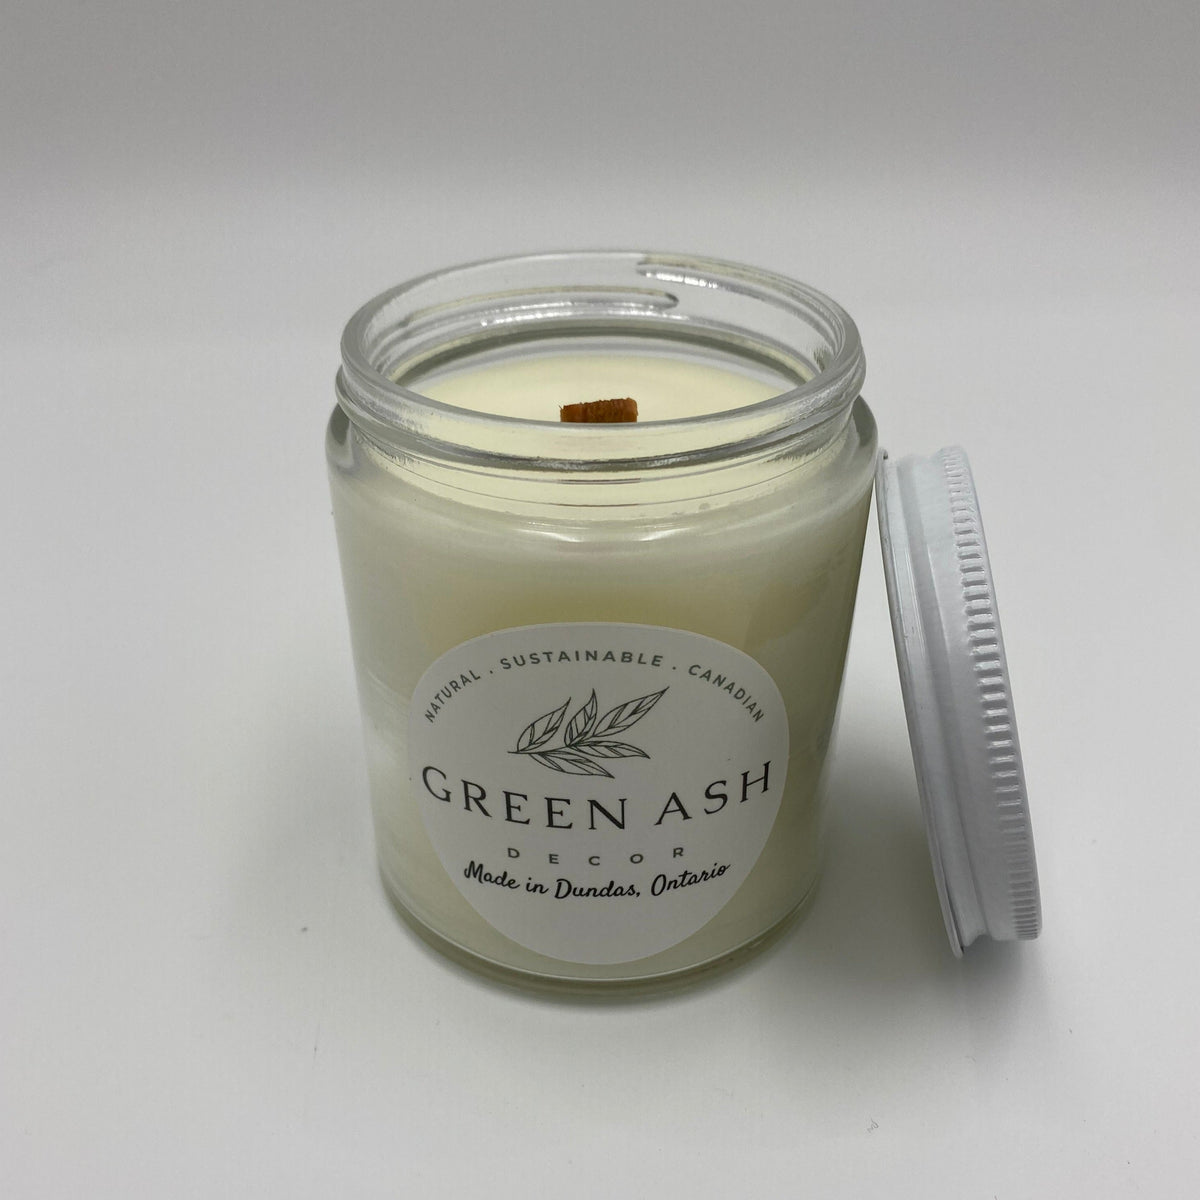 6oz Jar with White Tin Lid and Crackling Wooden Wick - Green Ash Decor